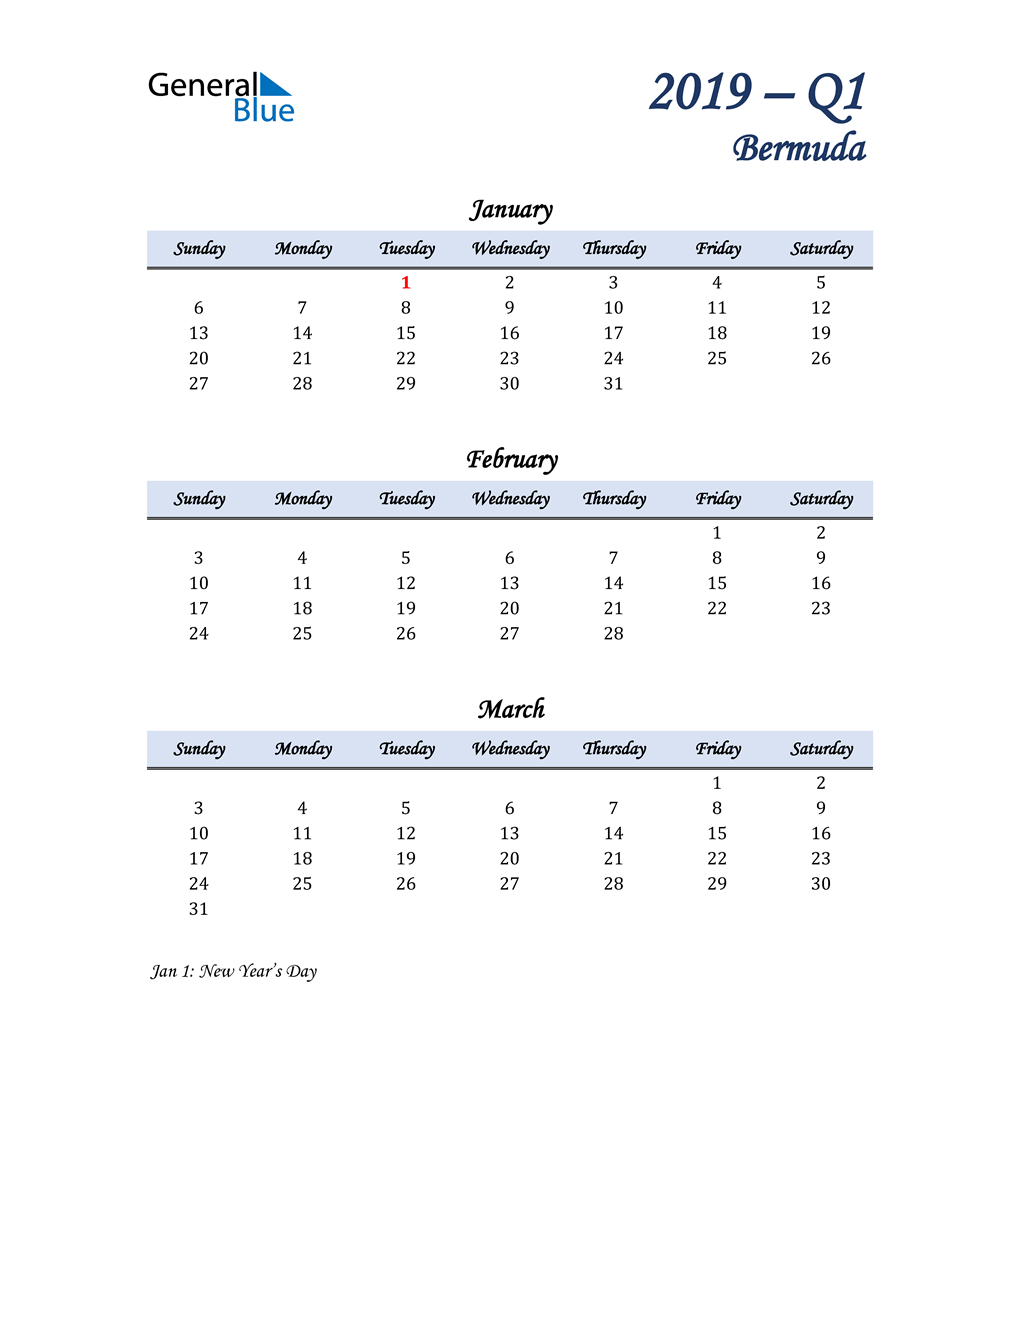  January, February, and March Calendar for Bermuda